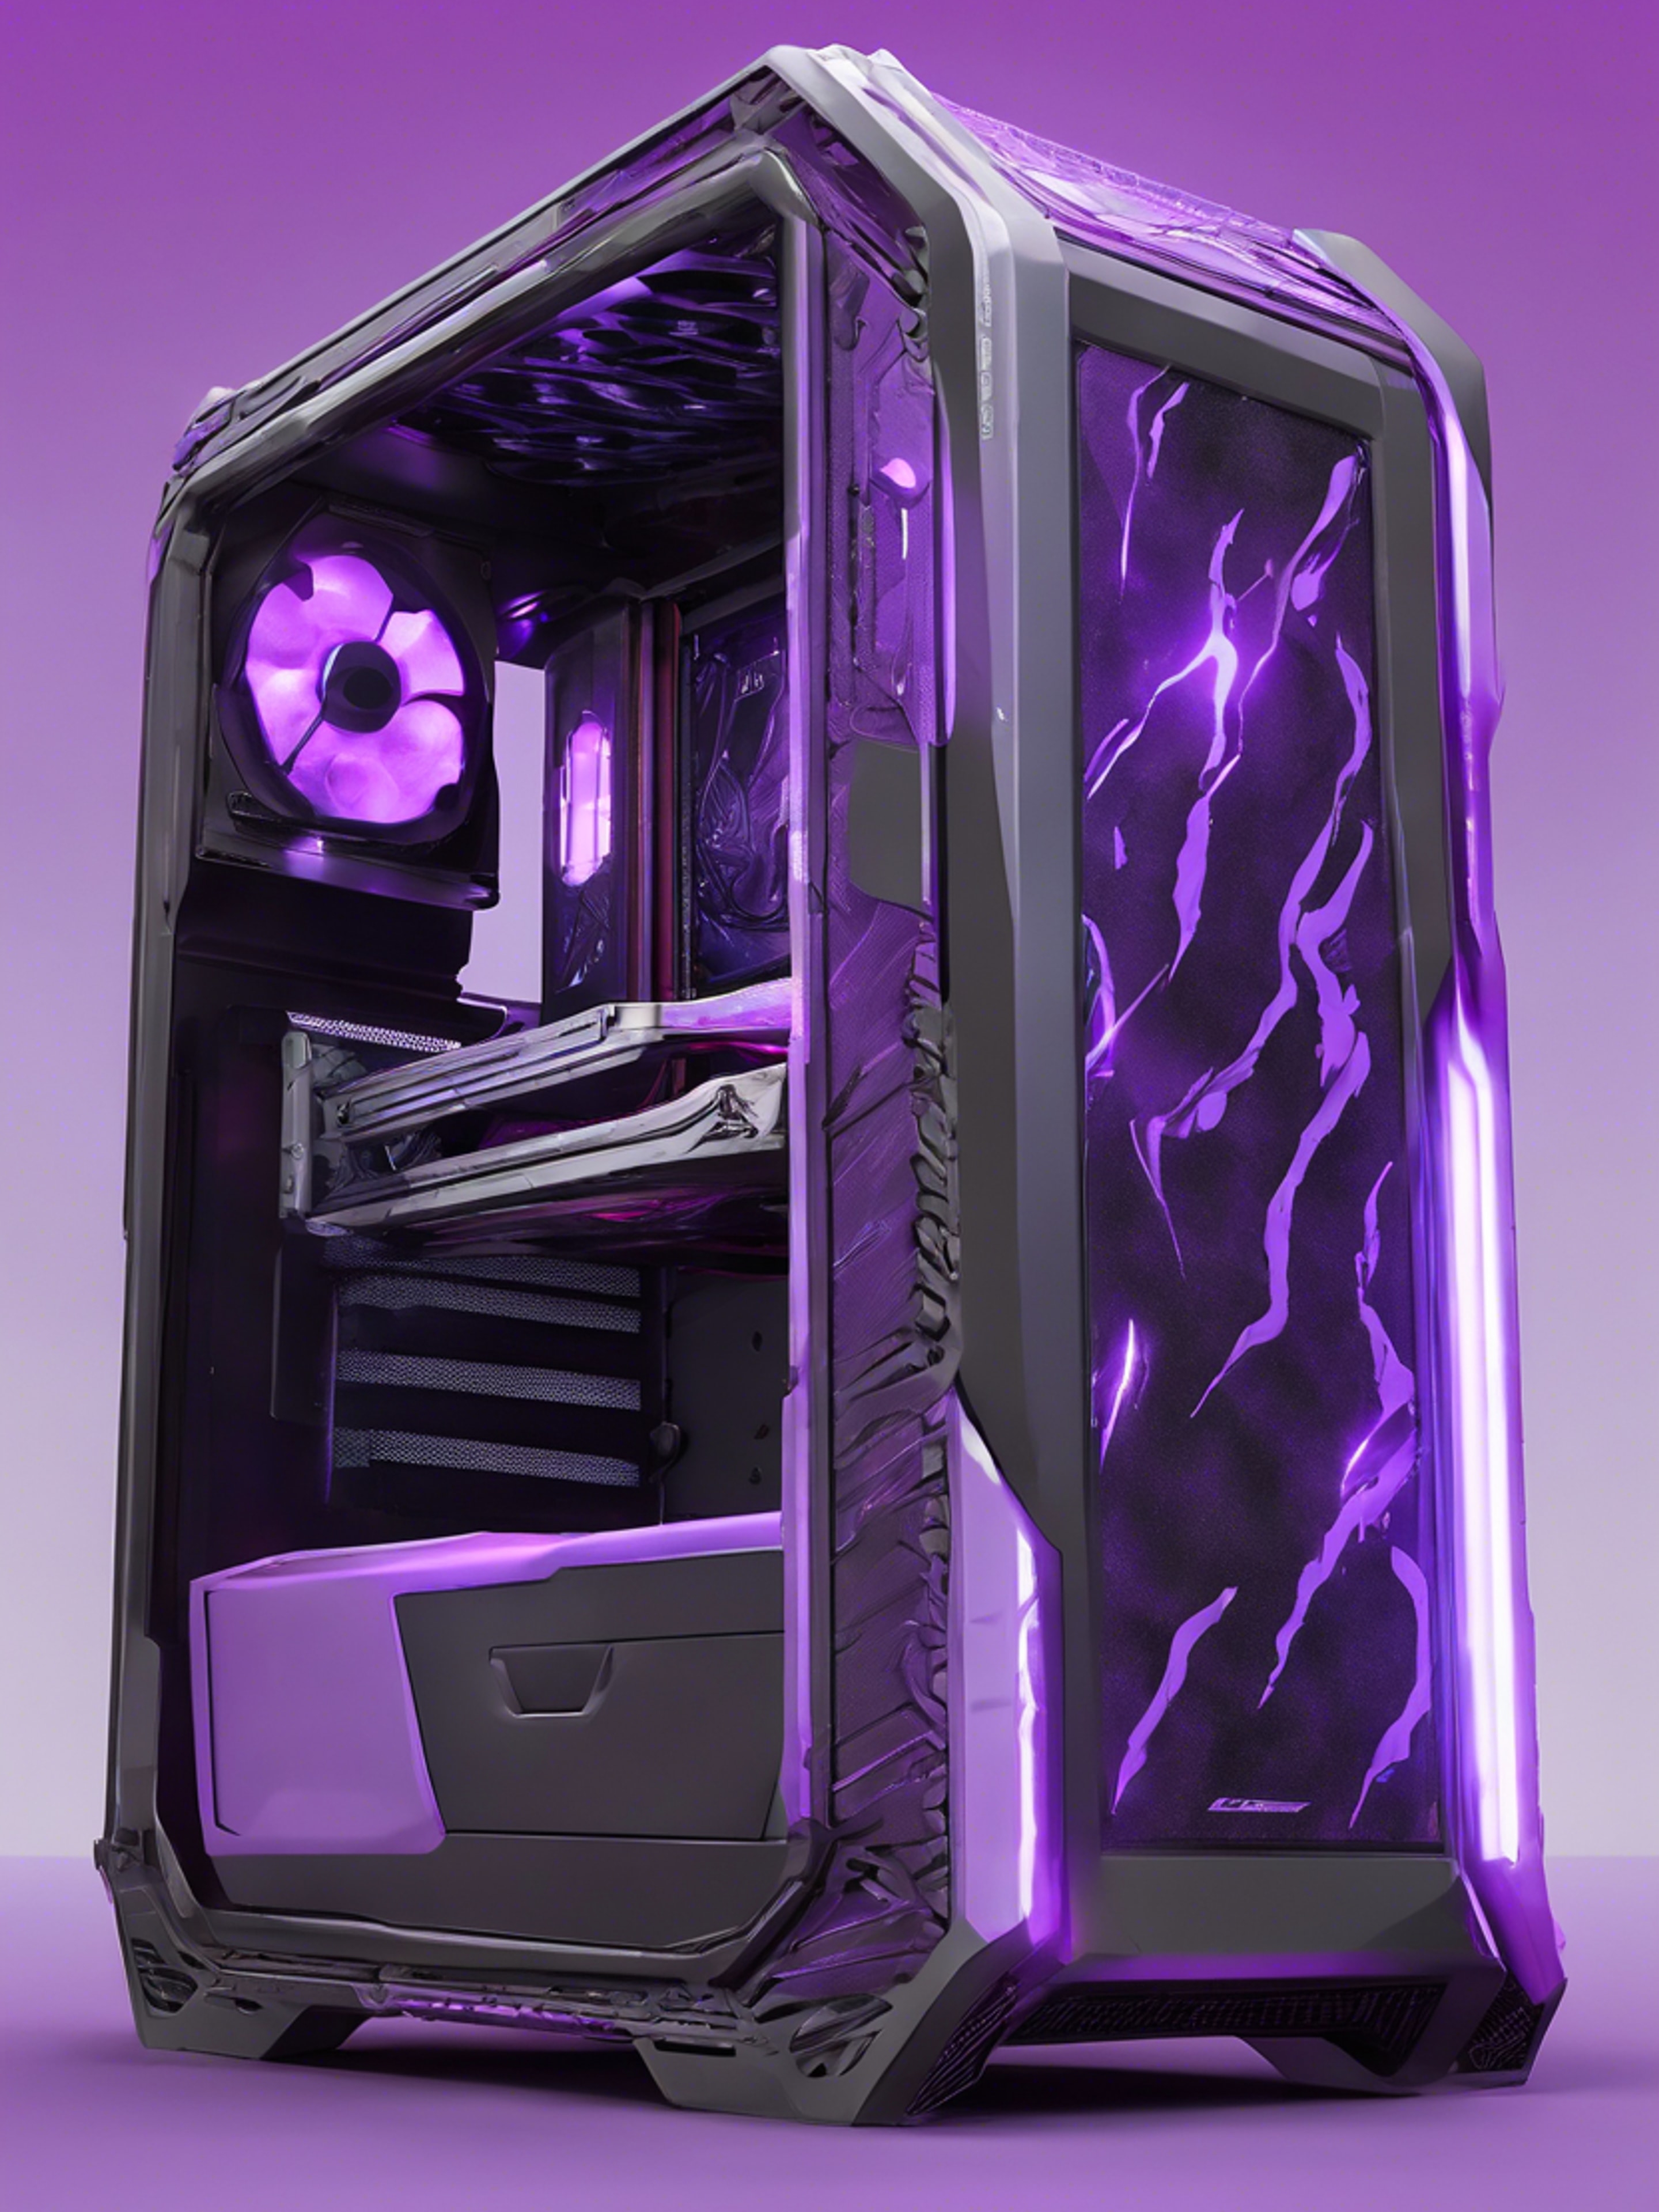 A side view of a thunderous gaming rig covered in custom neon purple detailing under cool lighting. Kertas dinding[cca71b66ee6840febbf4]